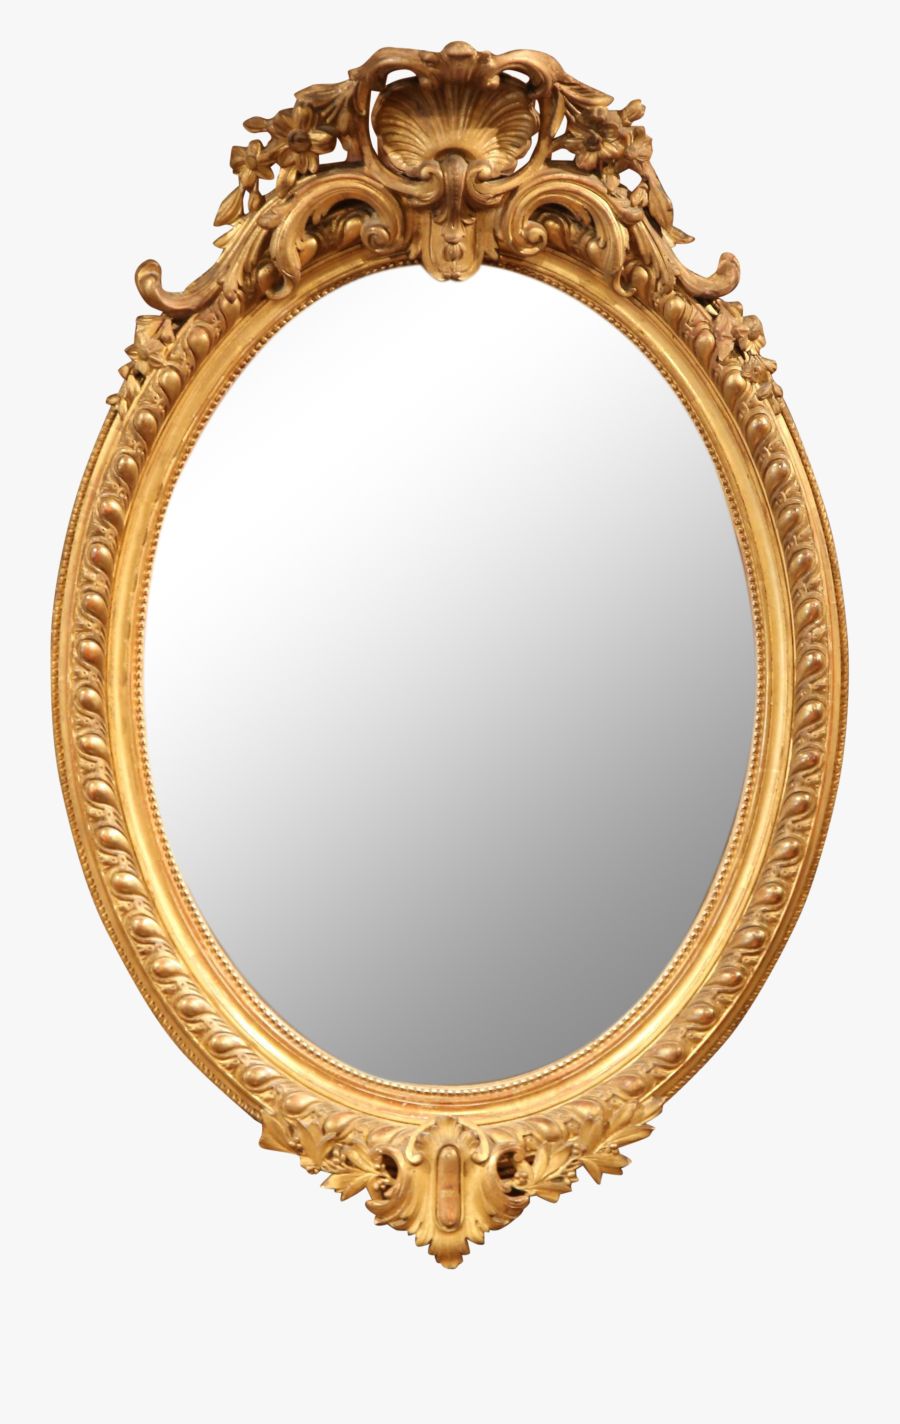 Transparent Mirror Clip Art – Oval Gold Leaf Mirror , Free Transparent Regarding Most Current Ring Shield Gold Leaf Wall Mirrors (View 7 of 15)